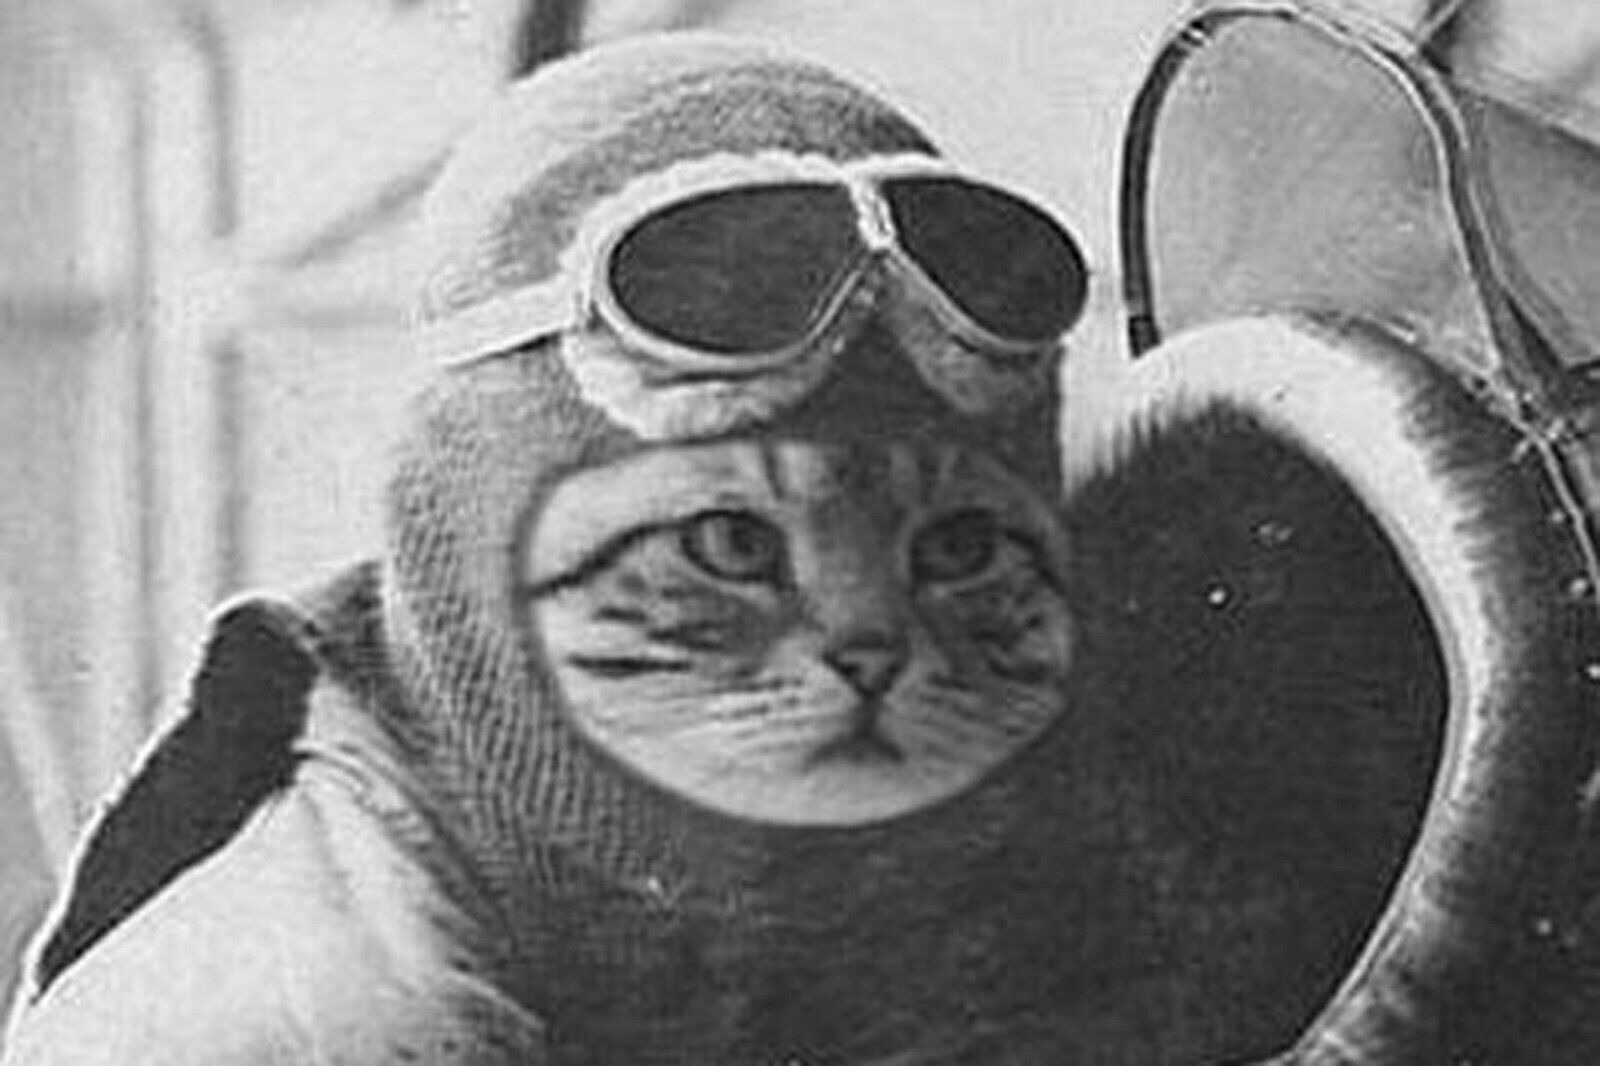 cat military Pilot WW2 Photo Glossy 4*6 in δ005